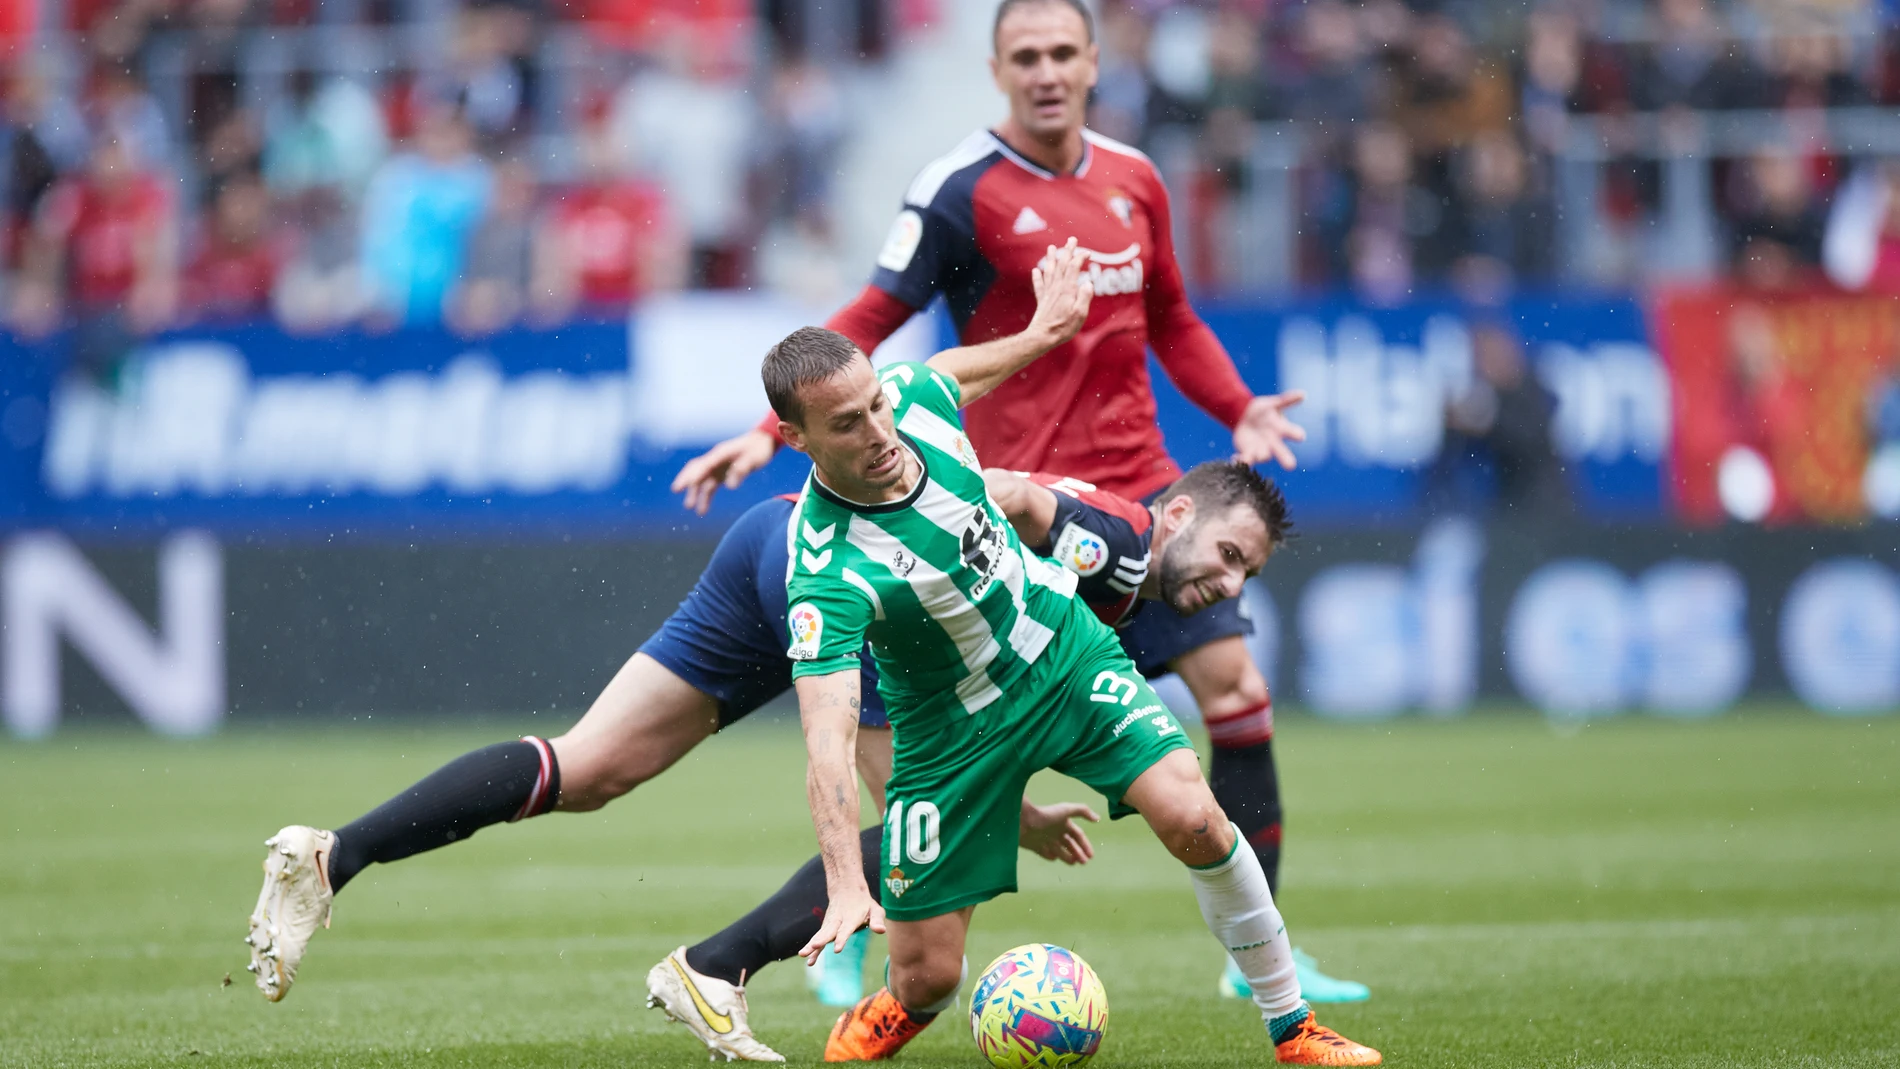 Sergio Canales of Real Betis Balompie competes for the ball with Jon Moncayola of CA Osasuna during the La Liga Santander match between CA Osasuna and Real Betis Balompie at El Sadar on April 22, 2023, in Pamplona, Spain. Ricardo Larreina / Afp7 22/04/2023 ONLY FOR USE IN SPAIN